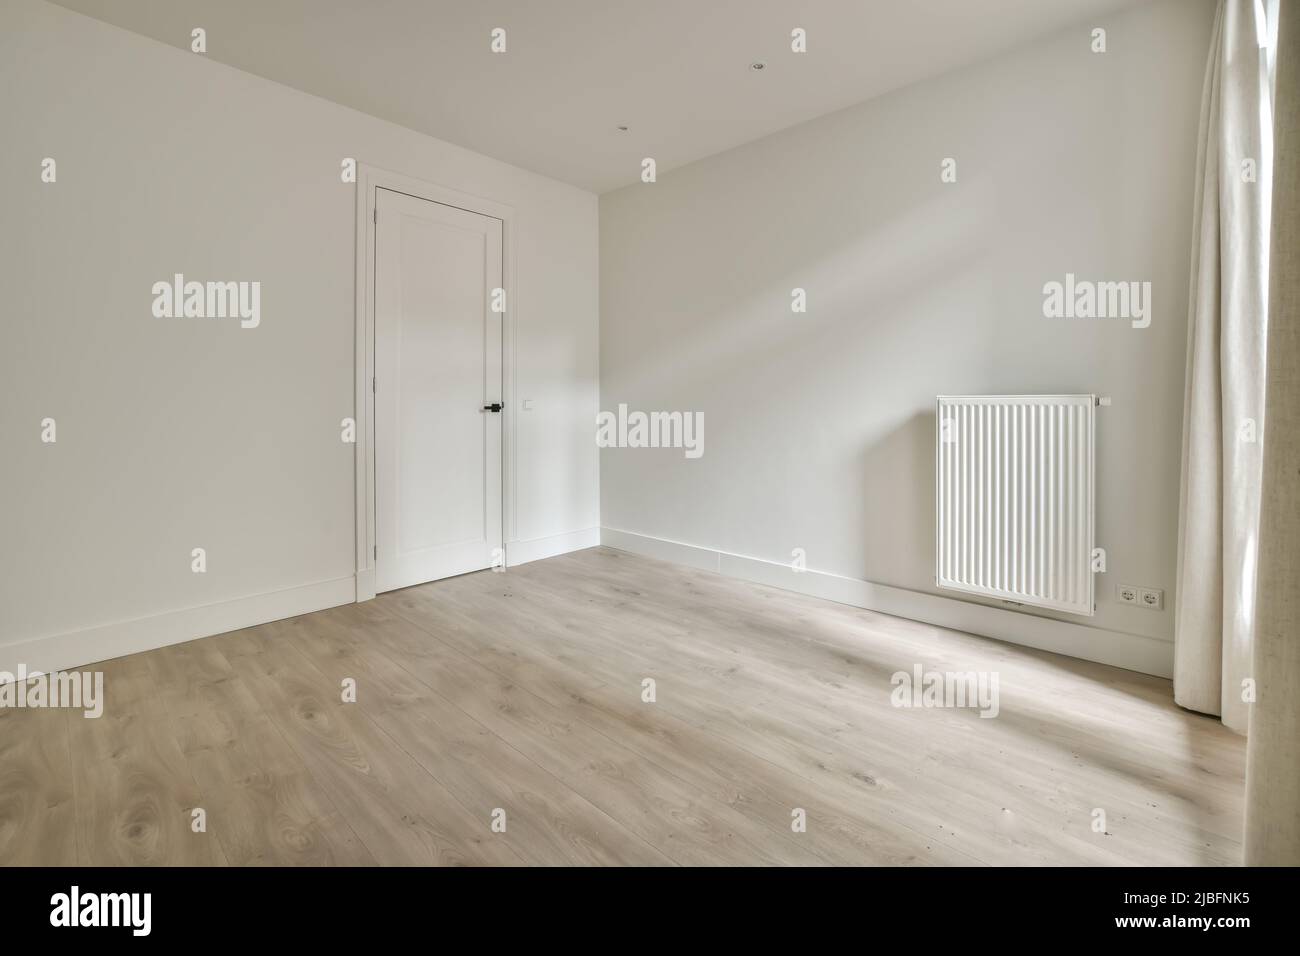 Interior of spacious empty refurbished living room with whitewash walls laminated floor with white door Stock Photo